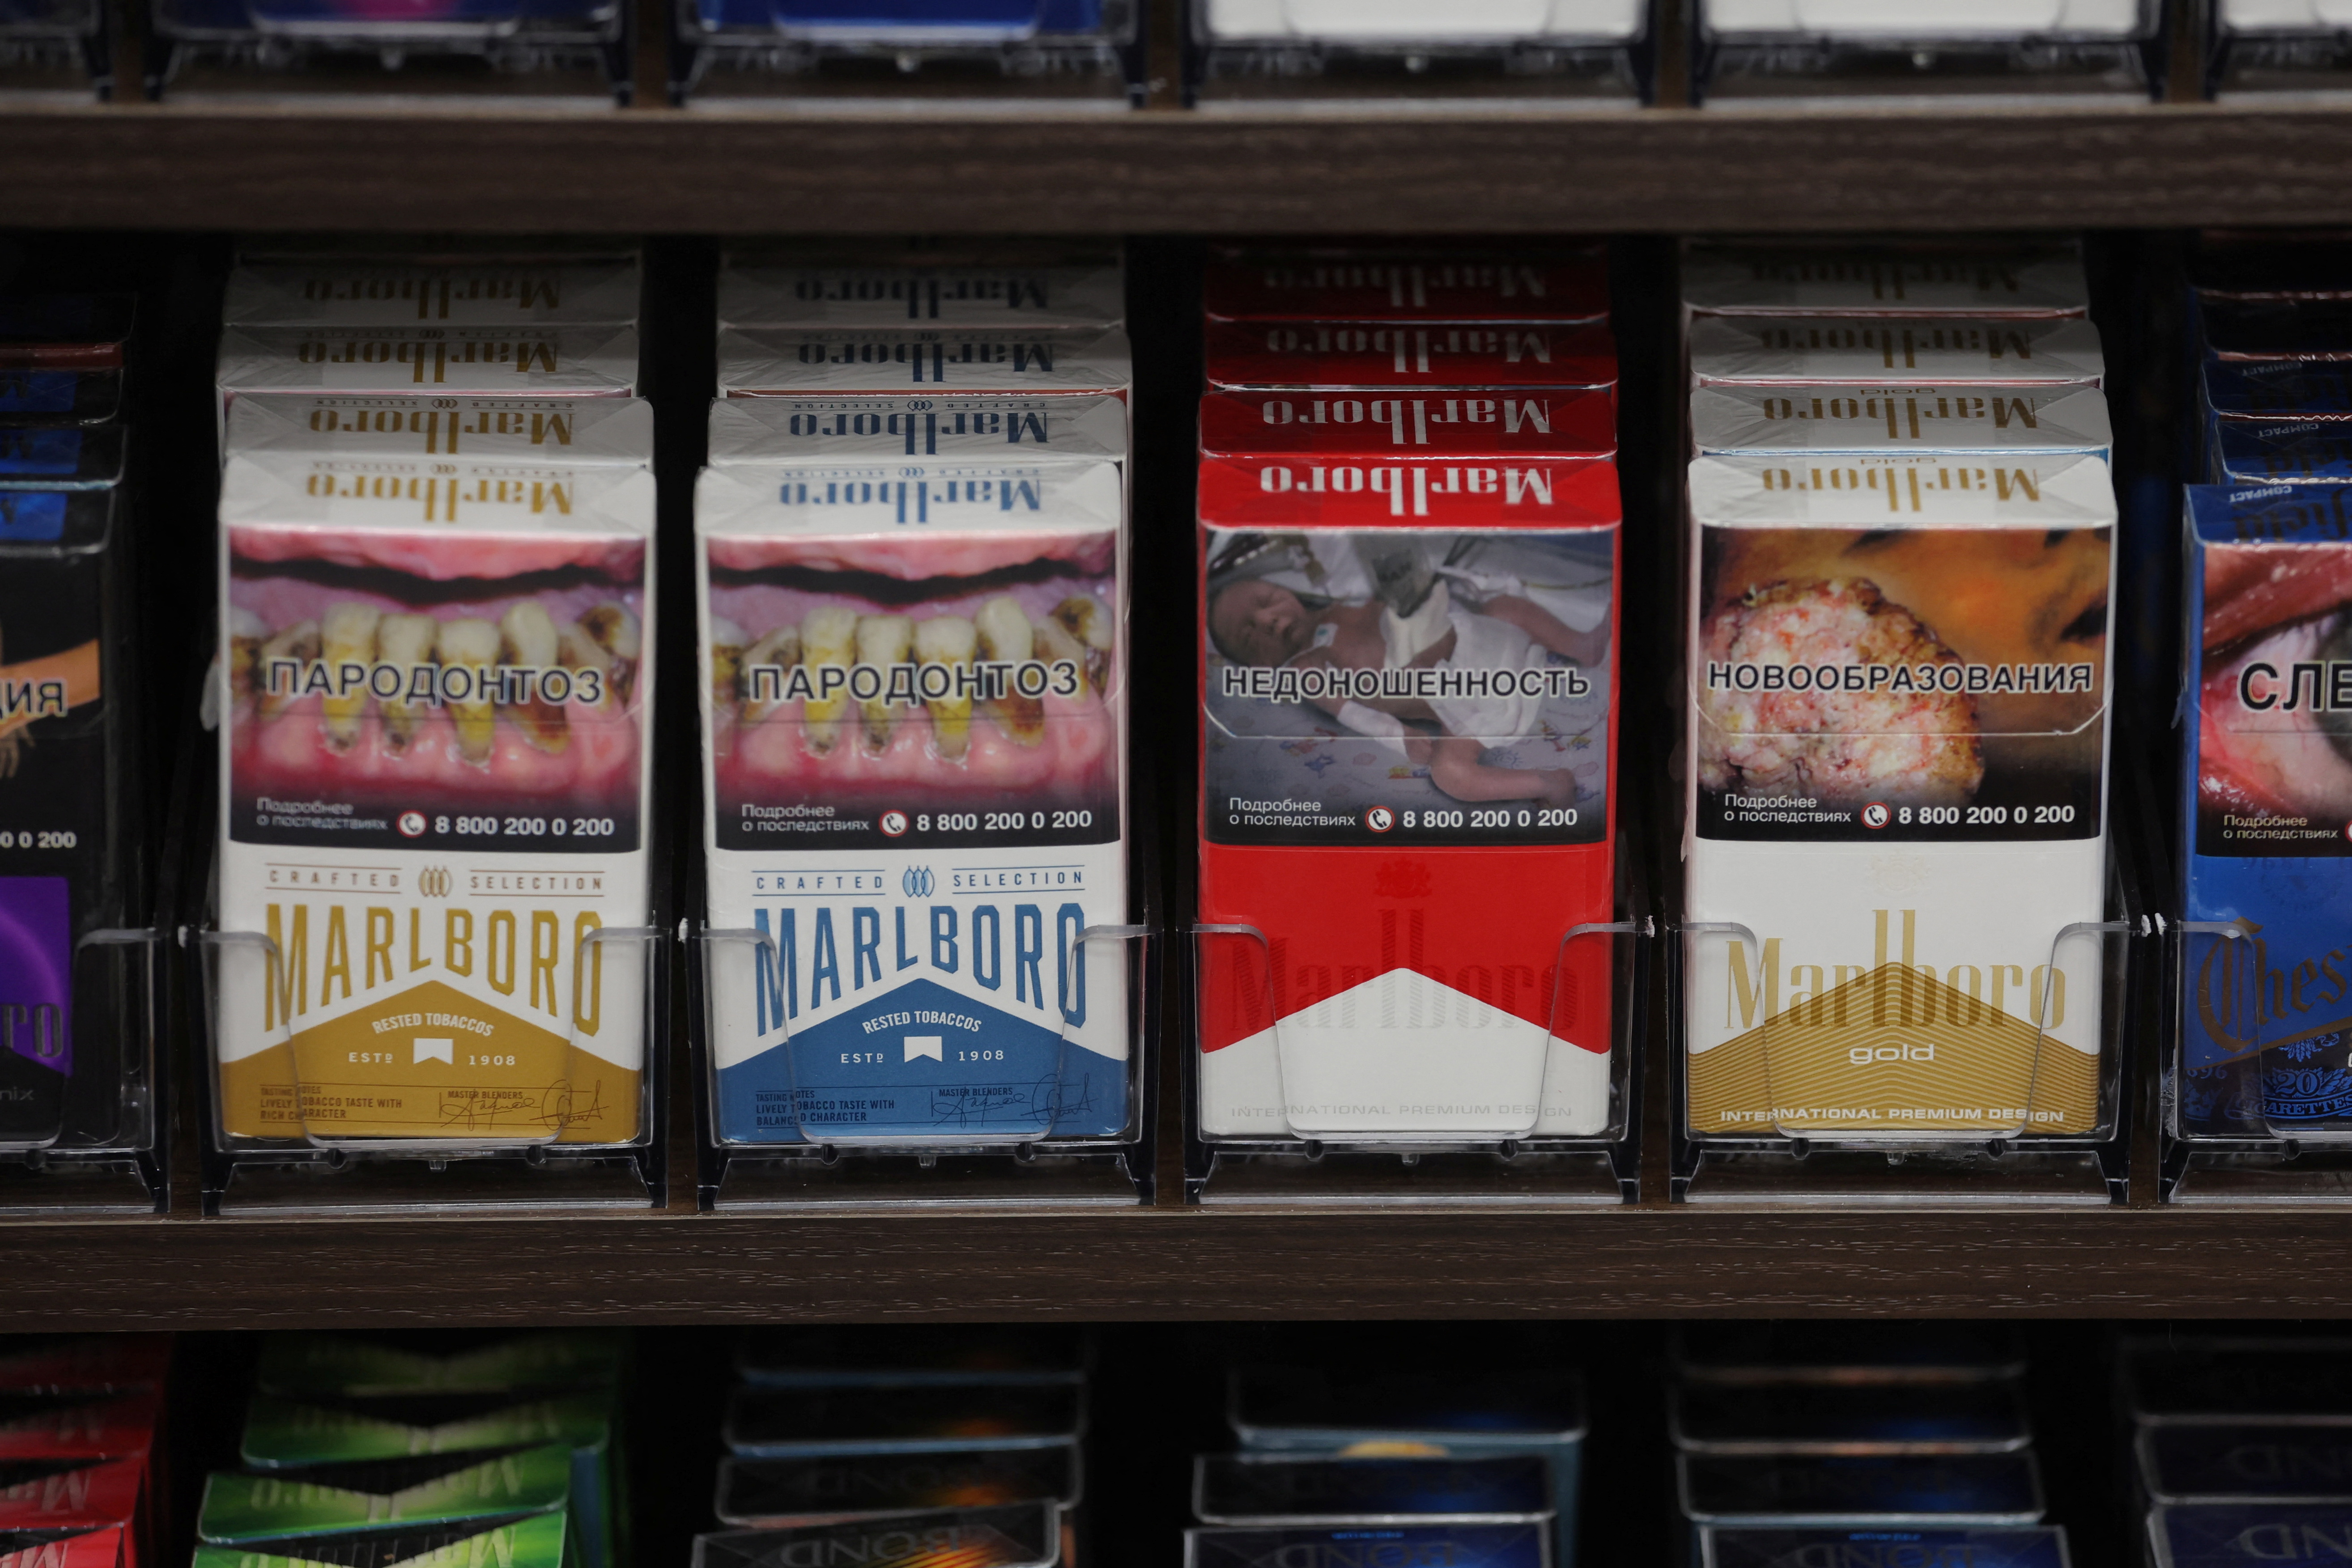 Packs of Marlboro cigarettes are on display in a shop in Saint Petersburg, Russia April 10, 2022.   REUTERS